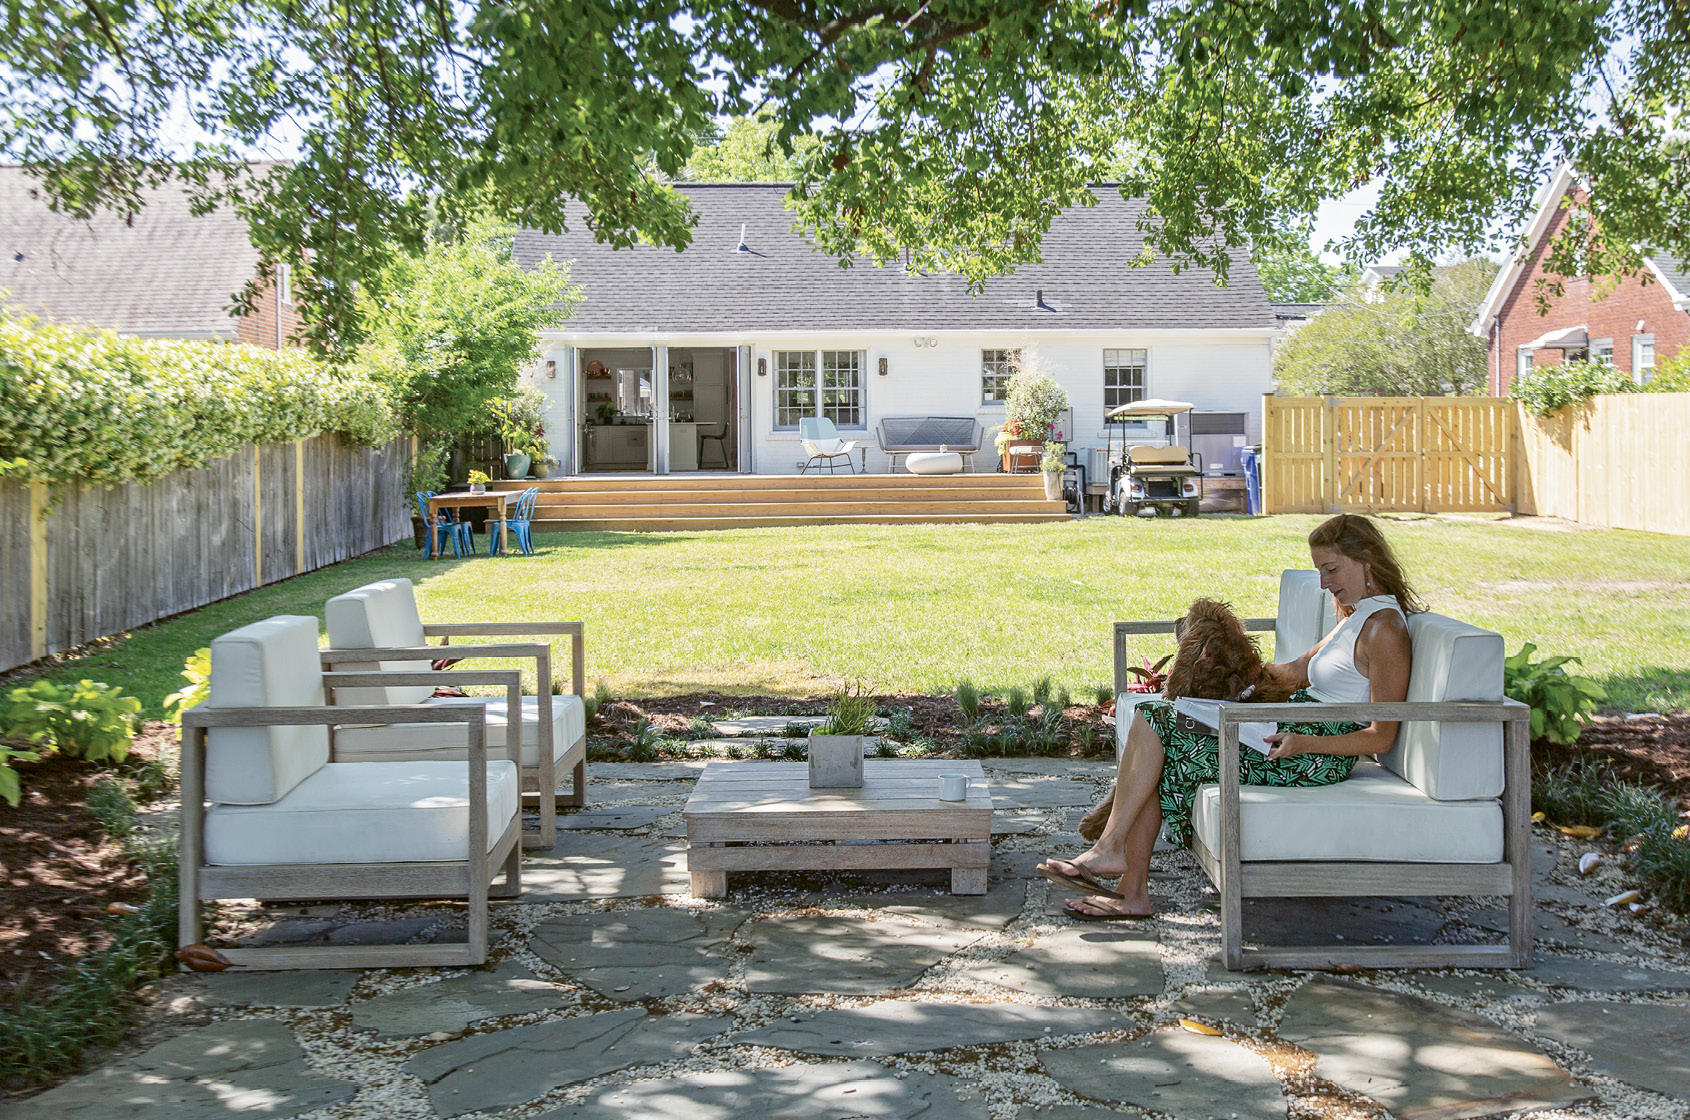 OUTDOOR OASIS: Two sets of French doors and a sprawling wooden deck add appeal to the rear of the home. But Rachel’s work out back has just begun. “I’m going to have big garden beds on both sides of the yard and plant more trees,” she says. “Then dreamland is to have a pool right in line with the patio.”